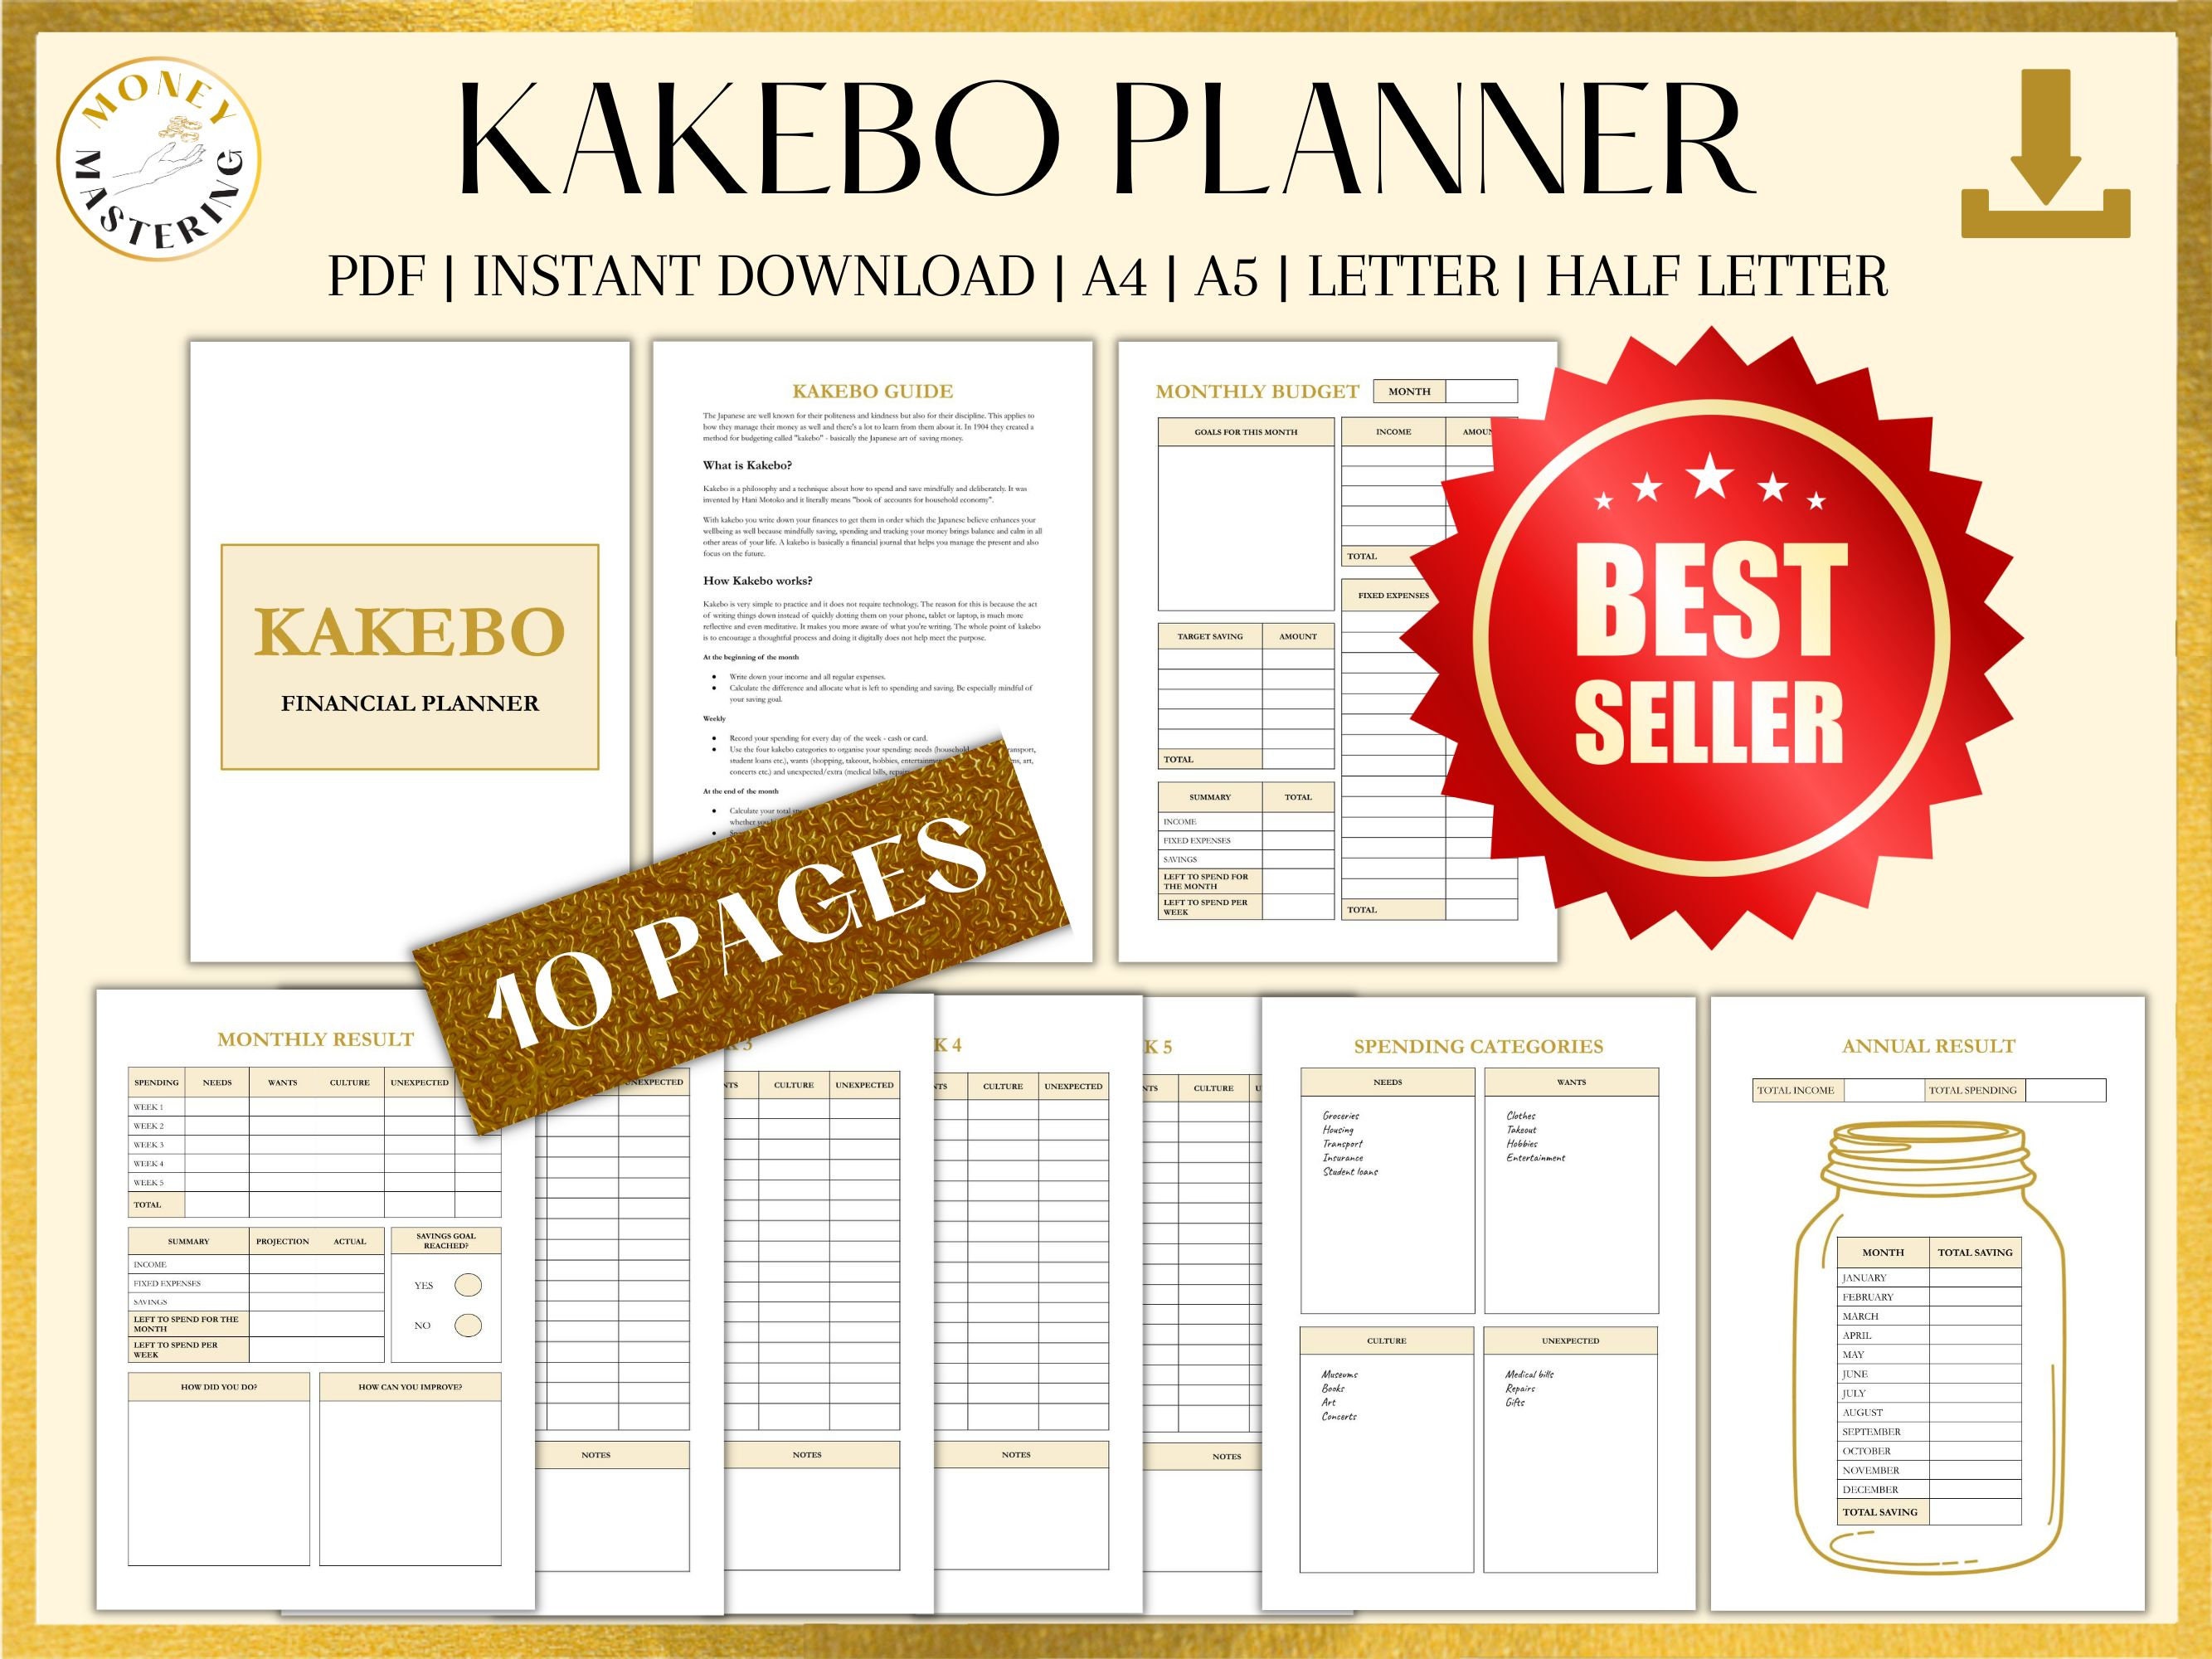 Kakeibo Budget Planner Undated Graphic by Mary's Designs